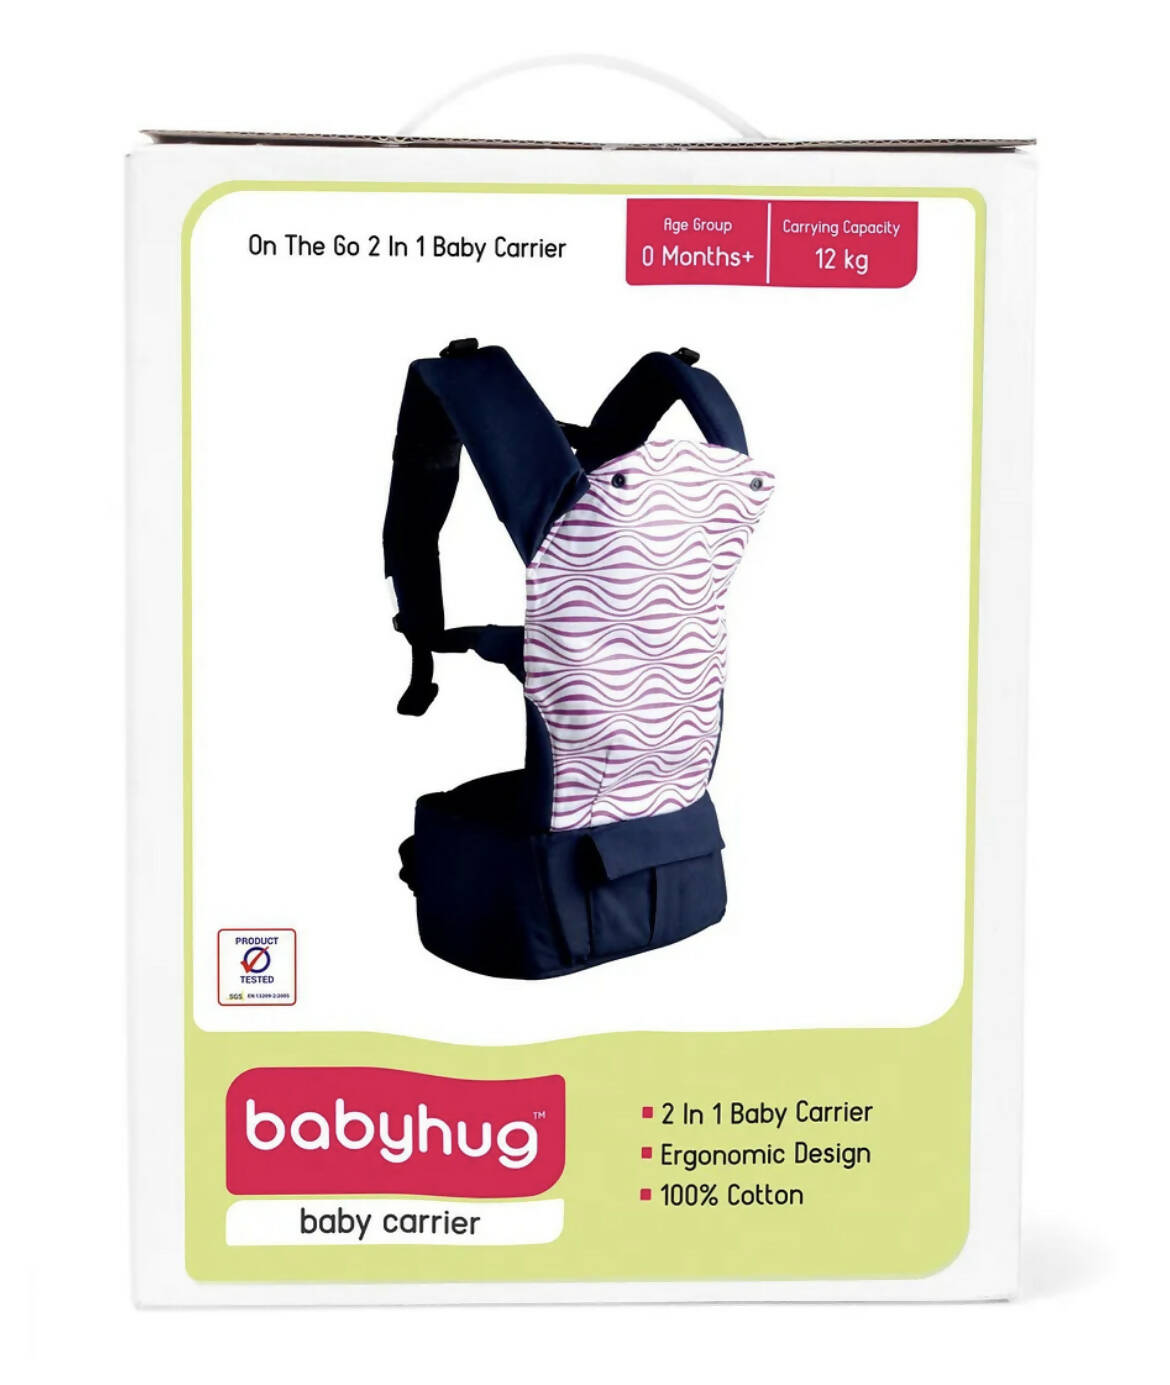 BABYHUG On The Go 2 in 1 baby carrier